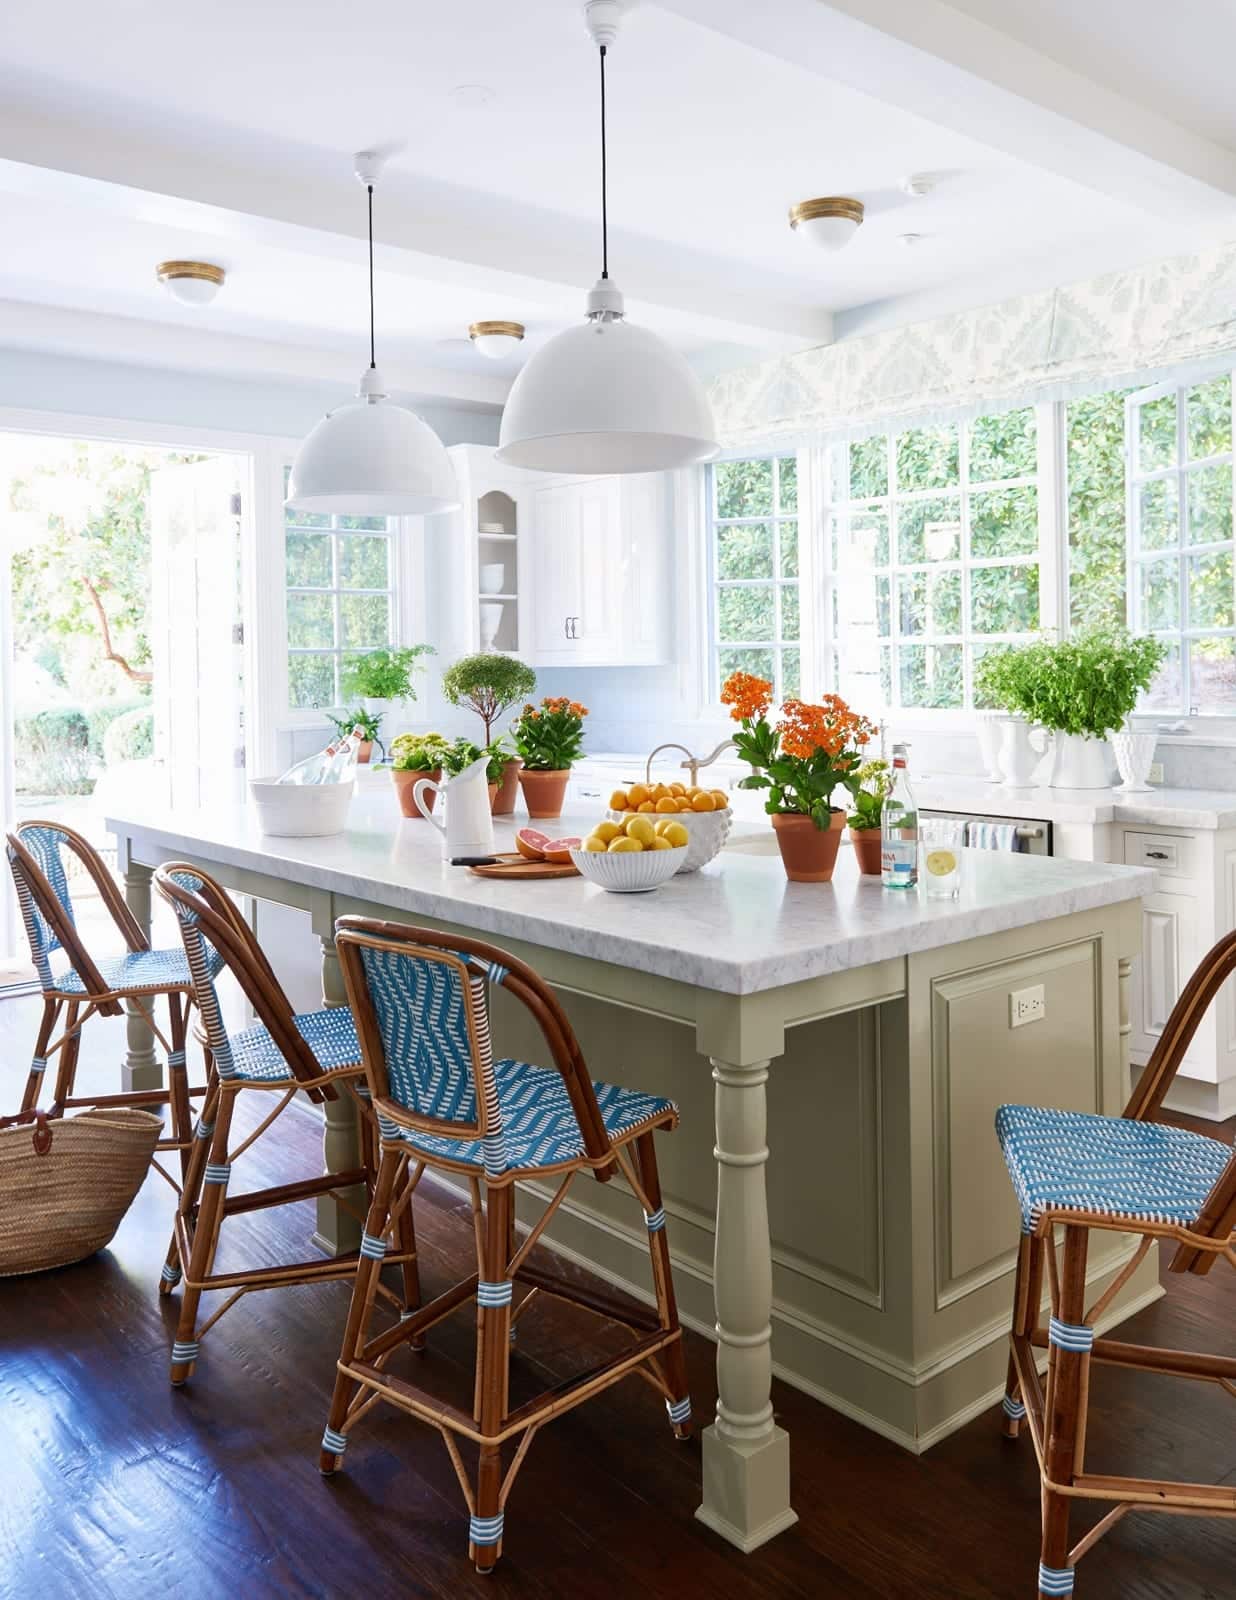 Bliss tranquility in the Pacific Palisades designed by Mark D. Sikes - Amy Neunsinger Photography -kitchen - kitchen design - kitchen island - pendant lights - pendants - riviera stool